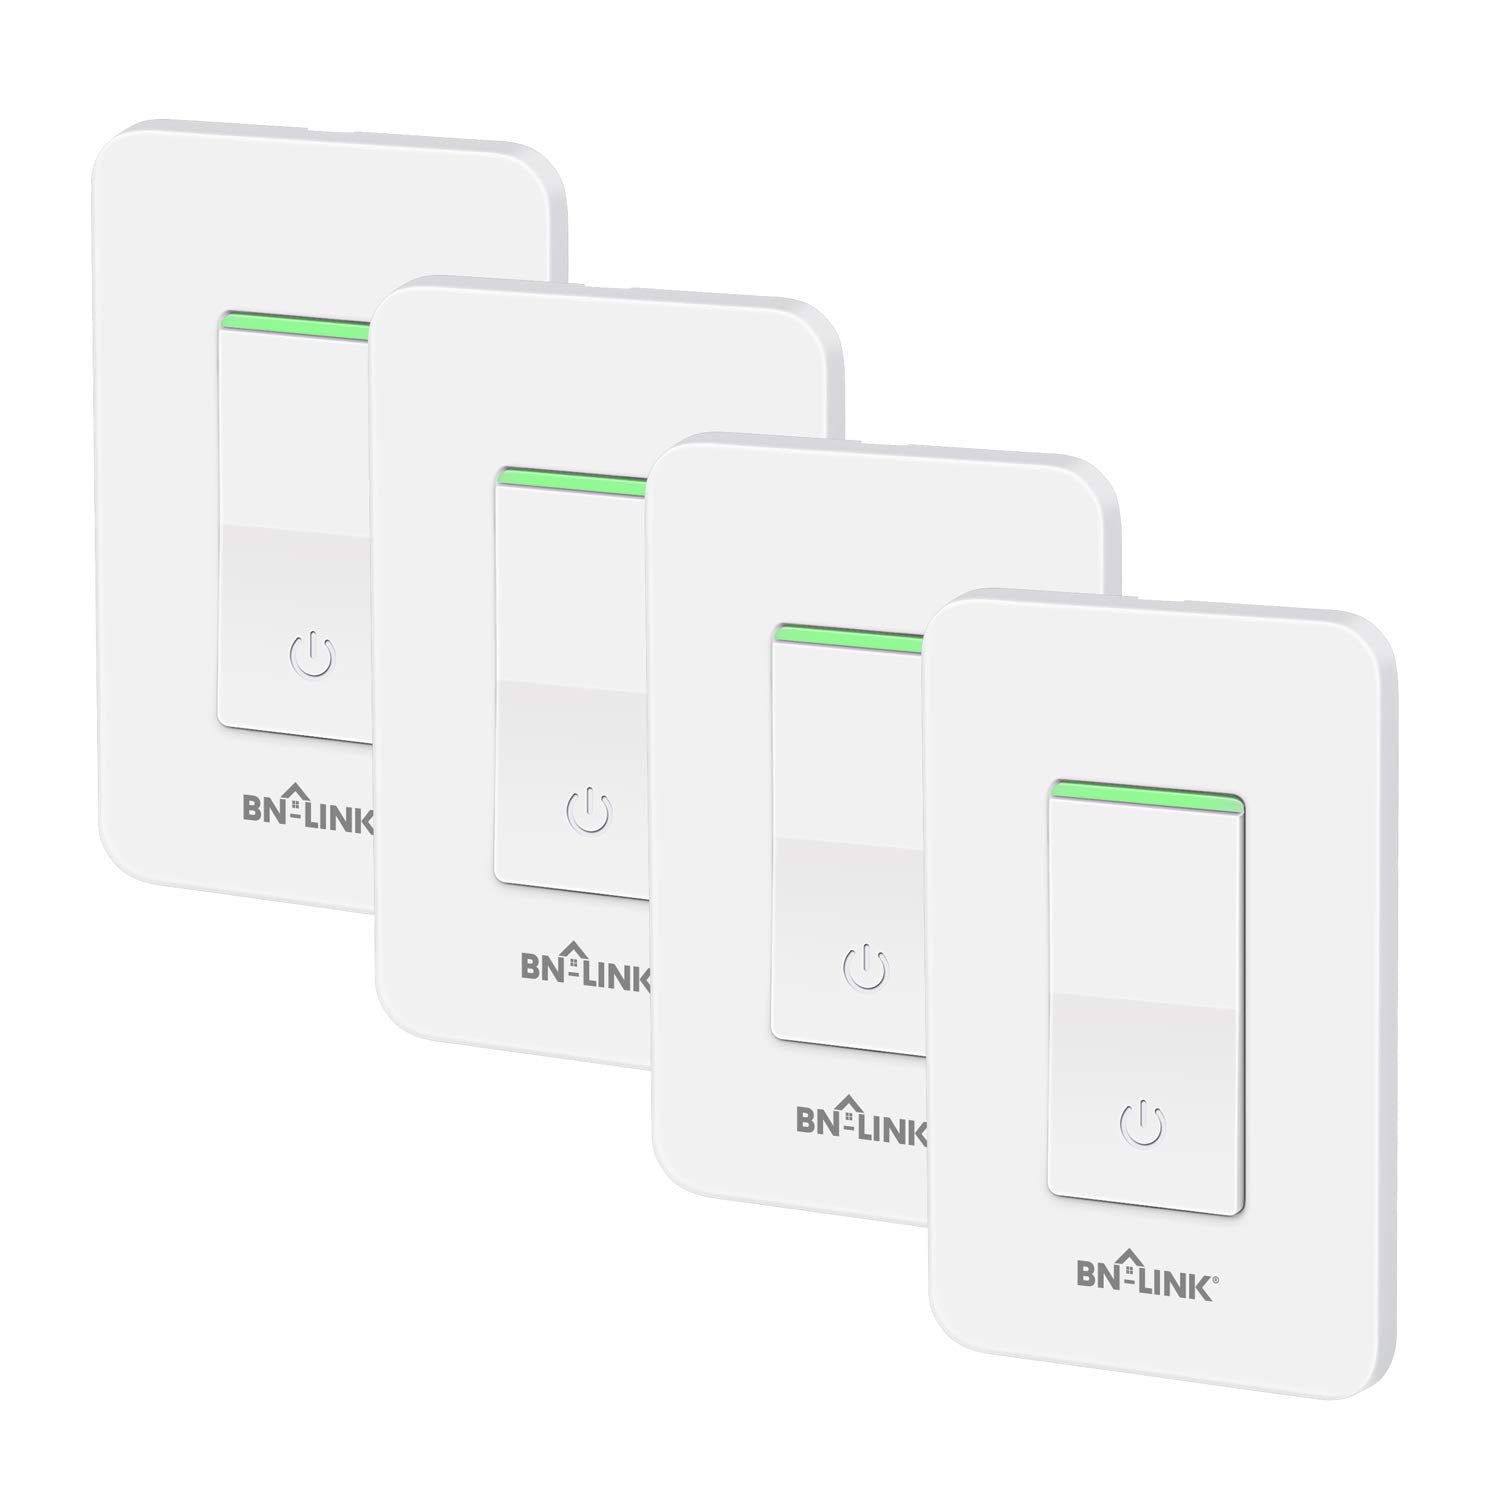 2 Pack Smart Light Switch - WiFi Wall Switches Work with Alexa Google  Home/Smart Life App, Single Pole, Standard Plate, Neutral Wire Needed 